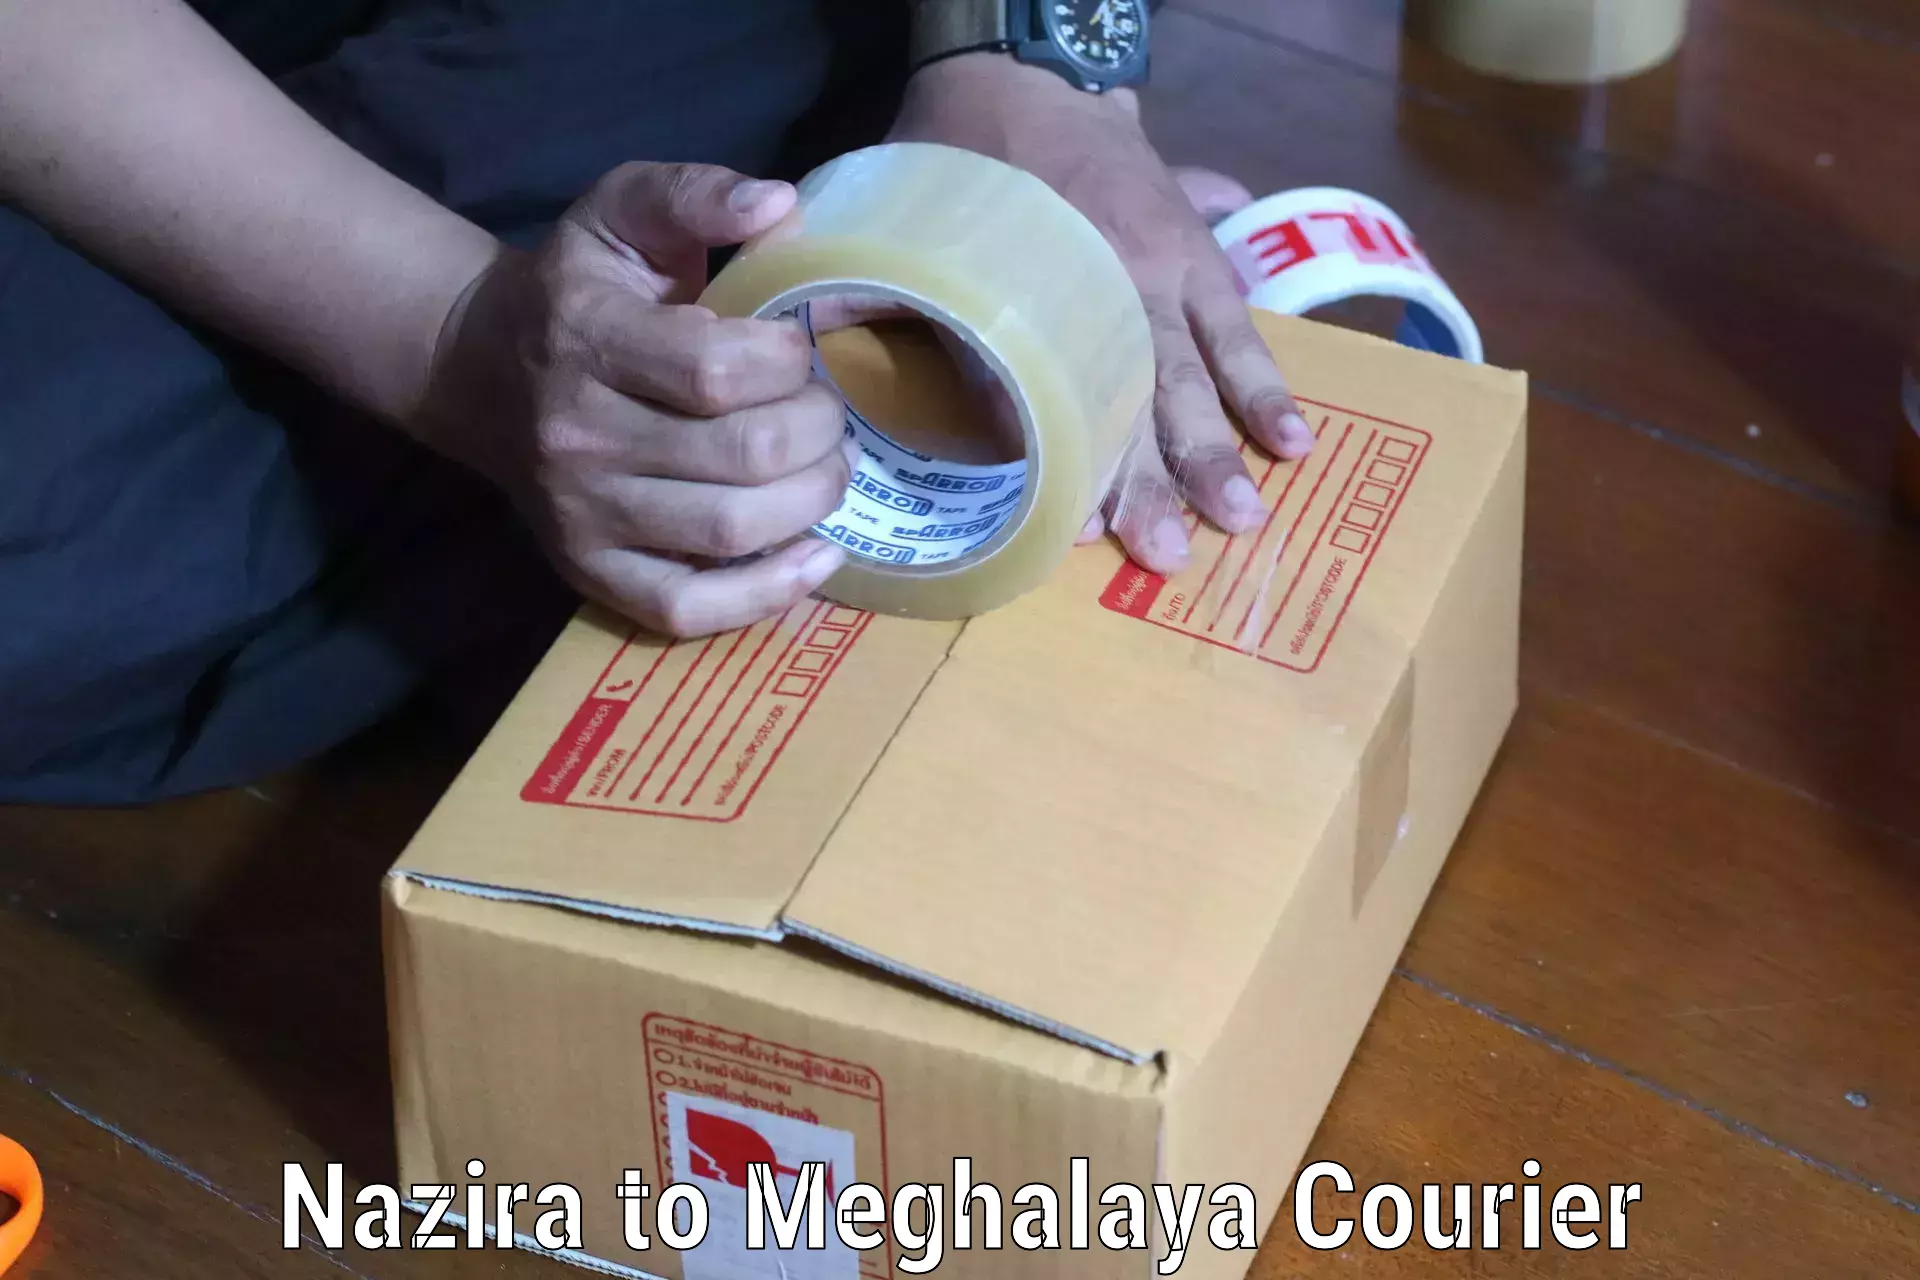 Cash on delivery service Nazira to Shillong